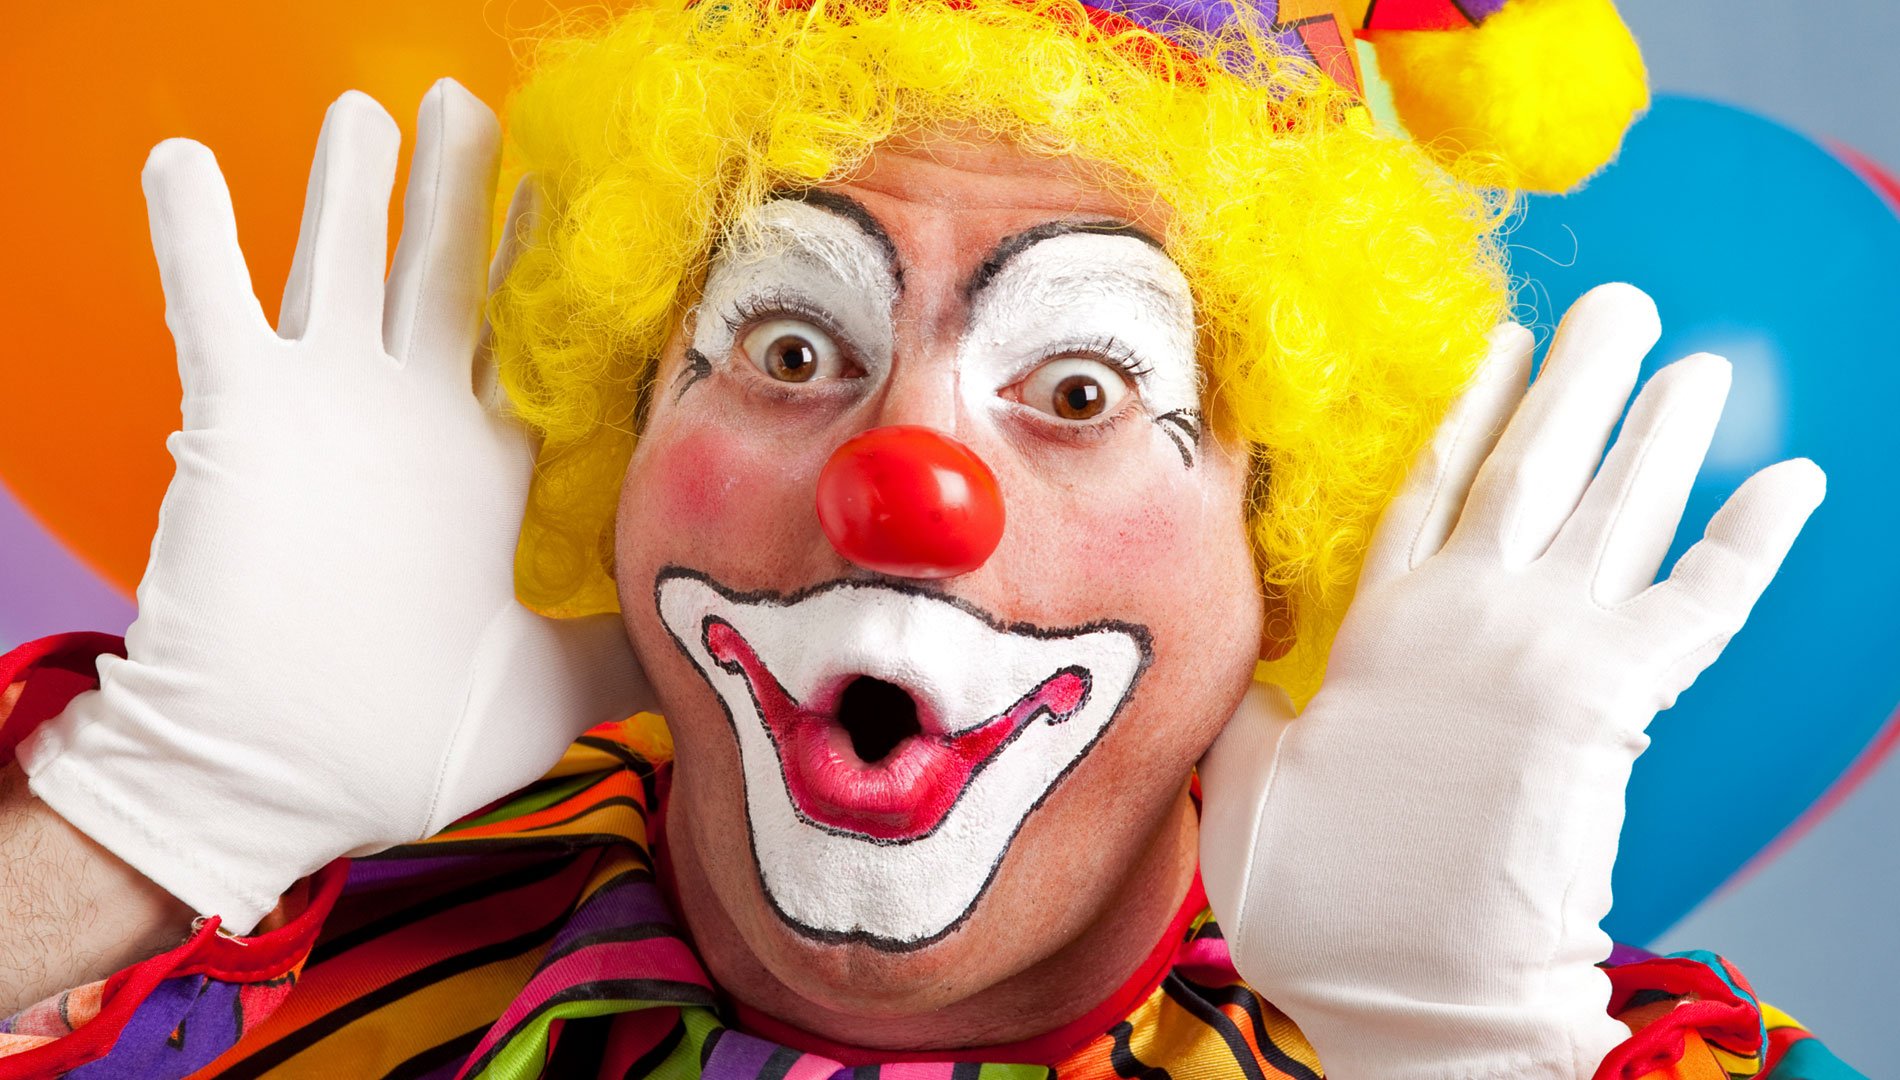 This Clown has a very ответ face. Humour